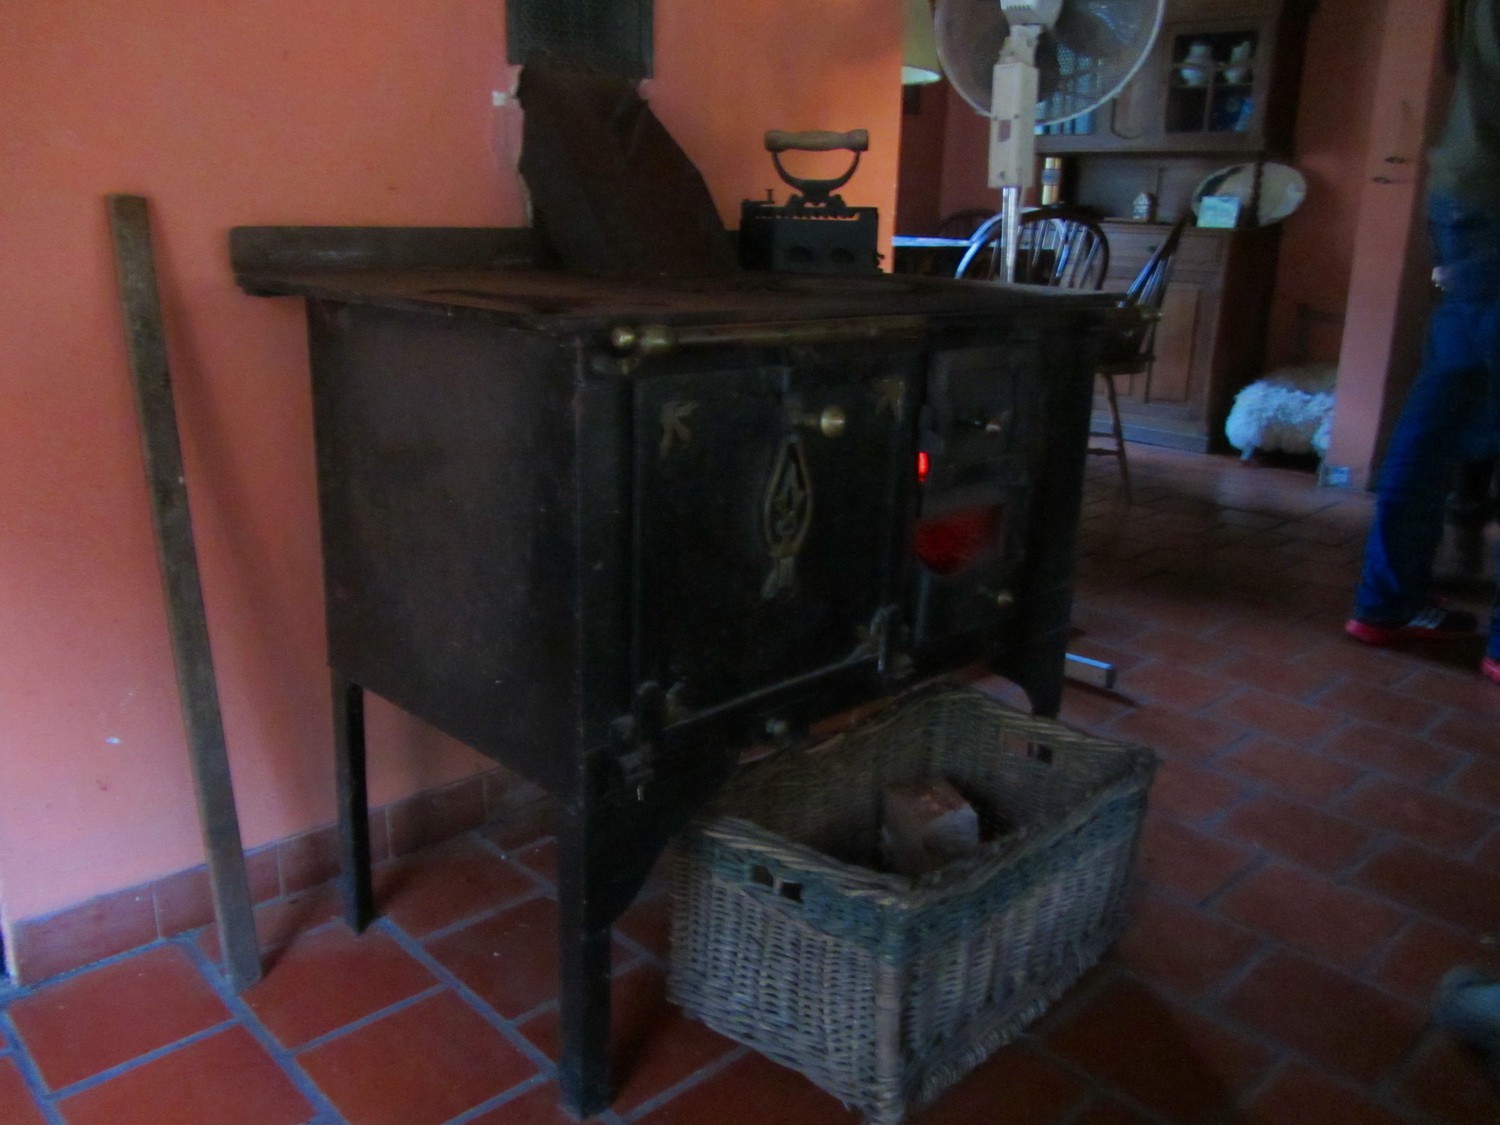 Oven in the manor-house